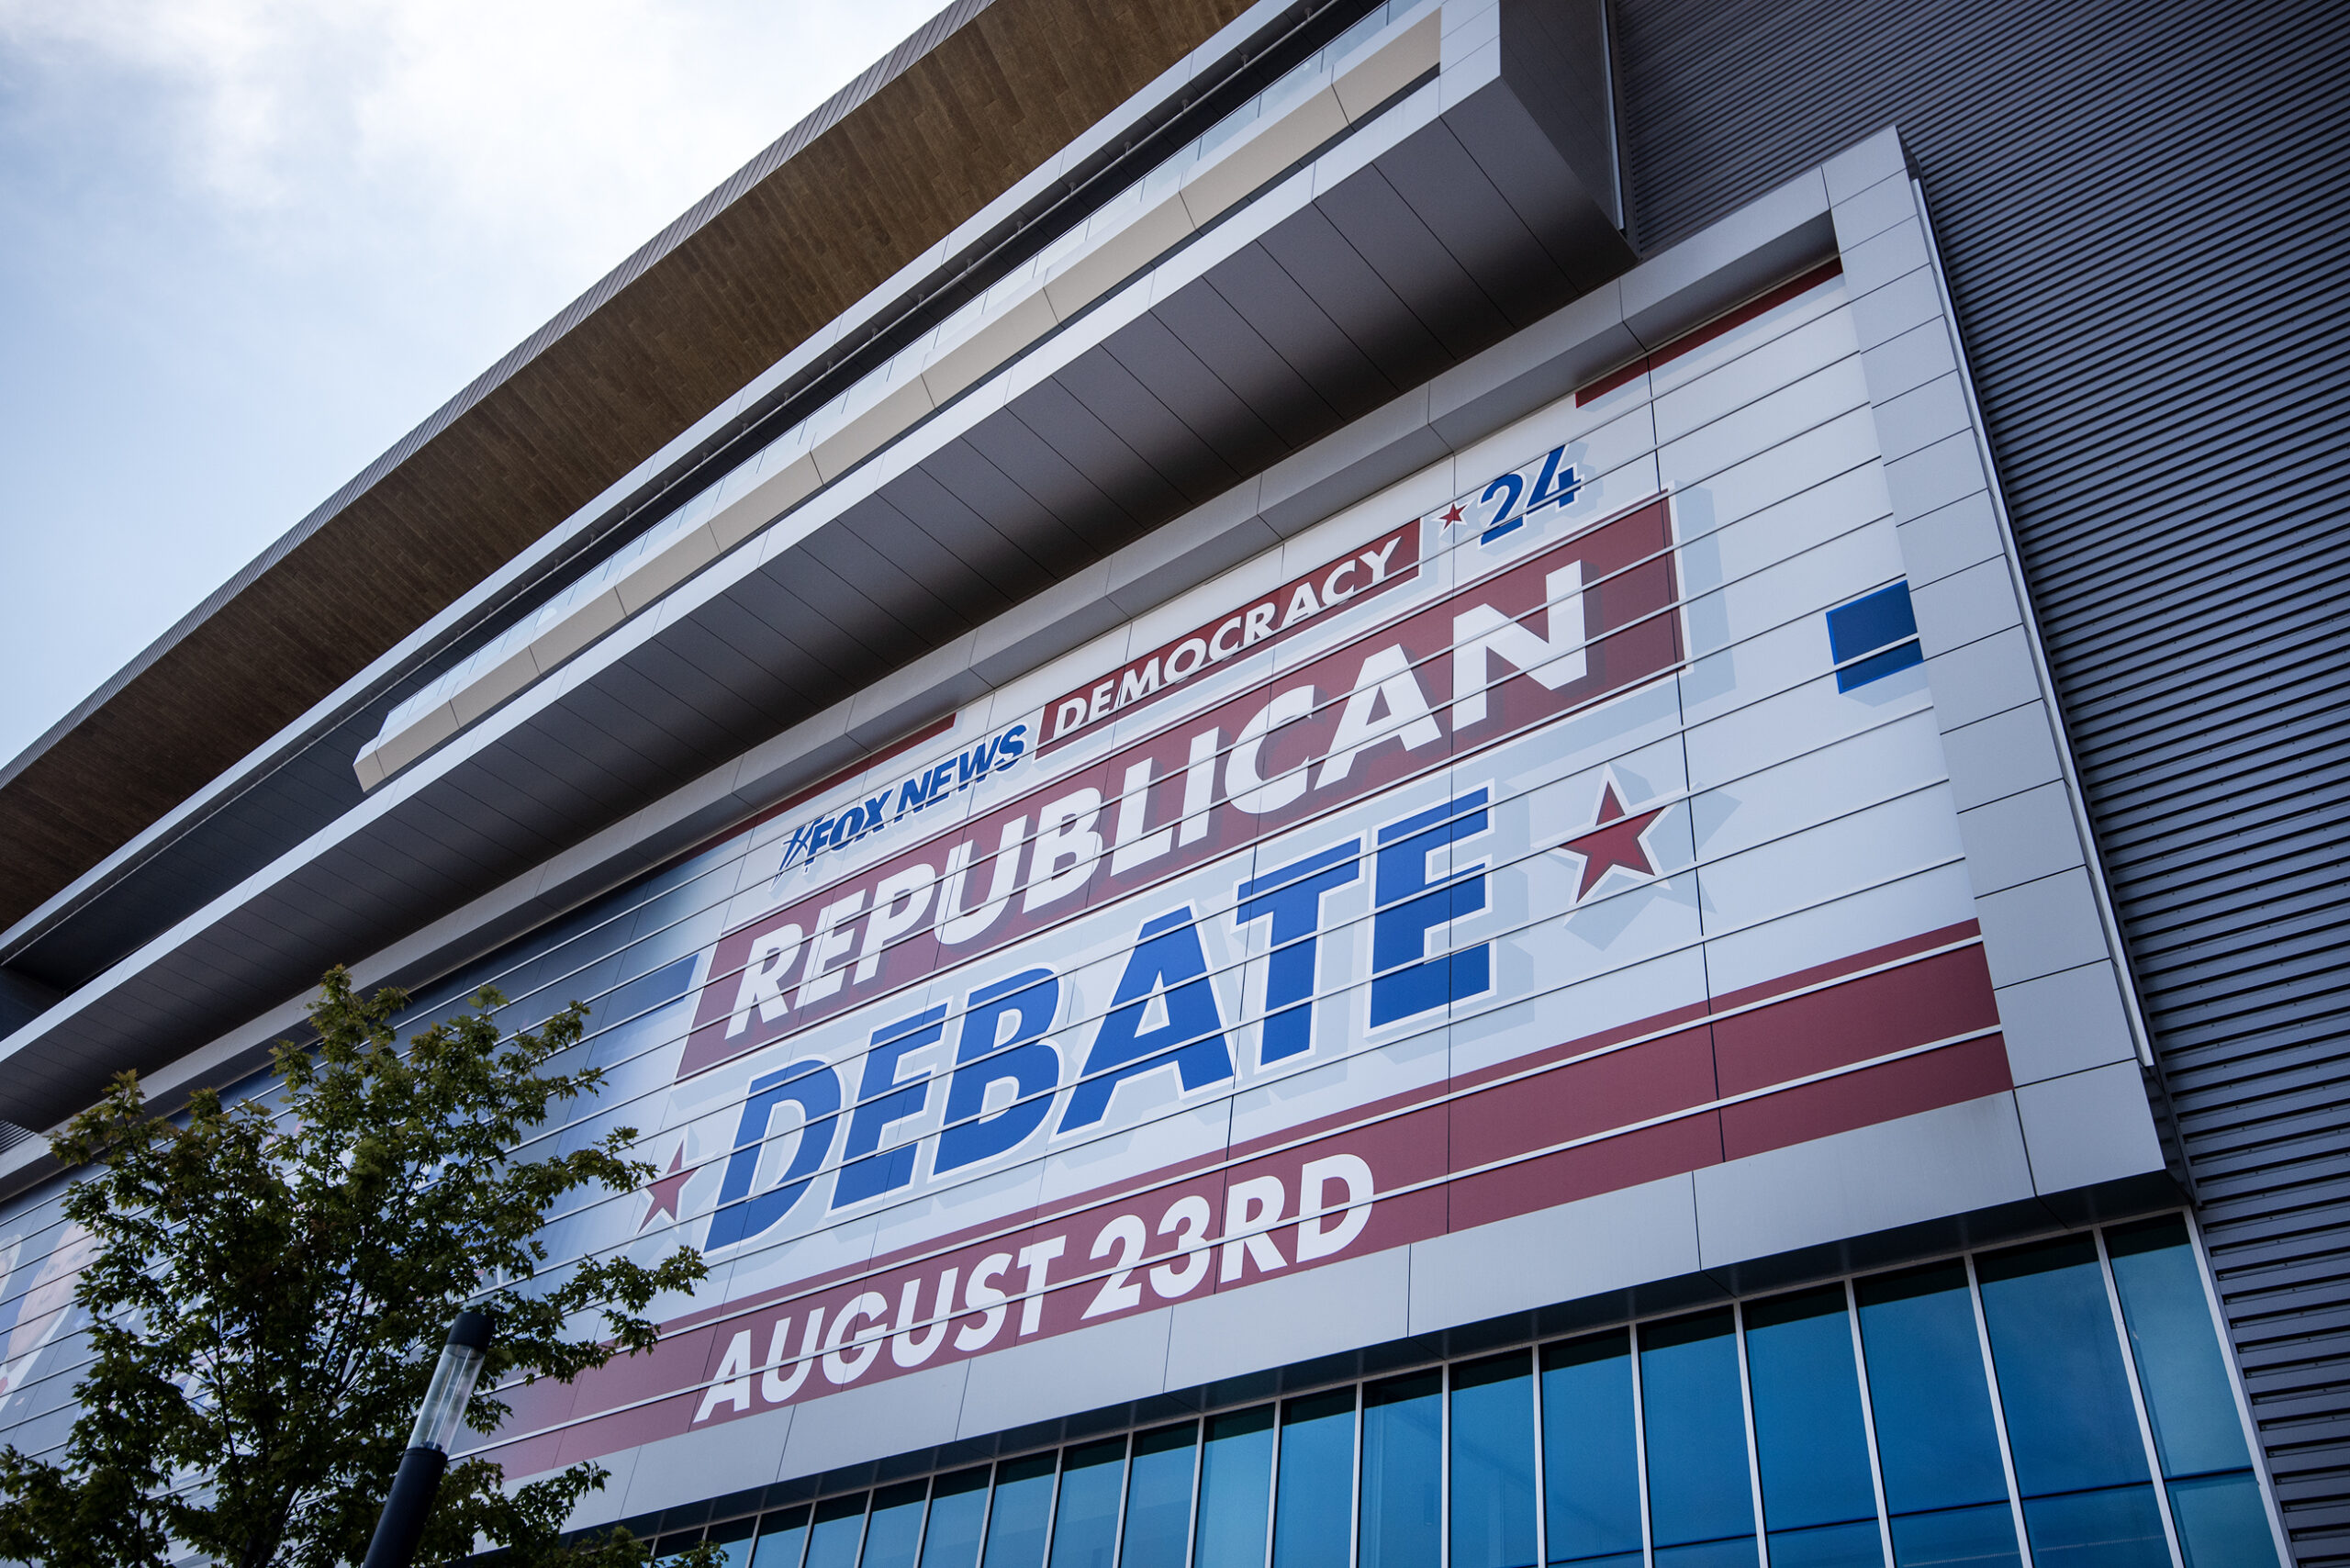 A sign says "Republican Debate August 23rd" on the side of the Fiserv Forum.